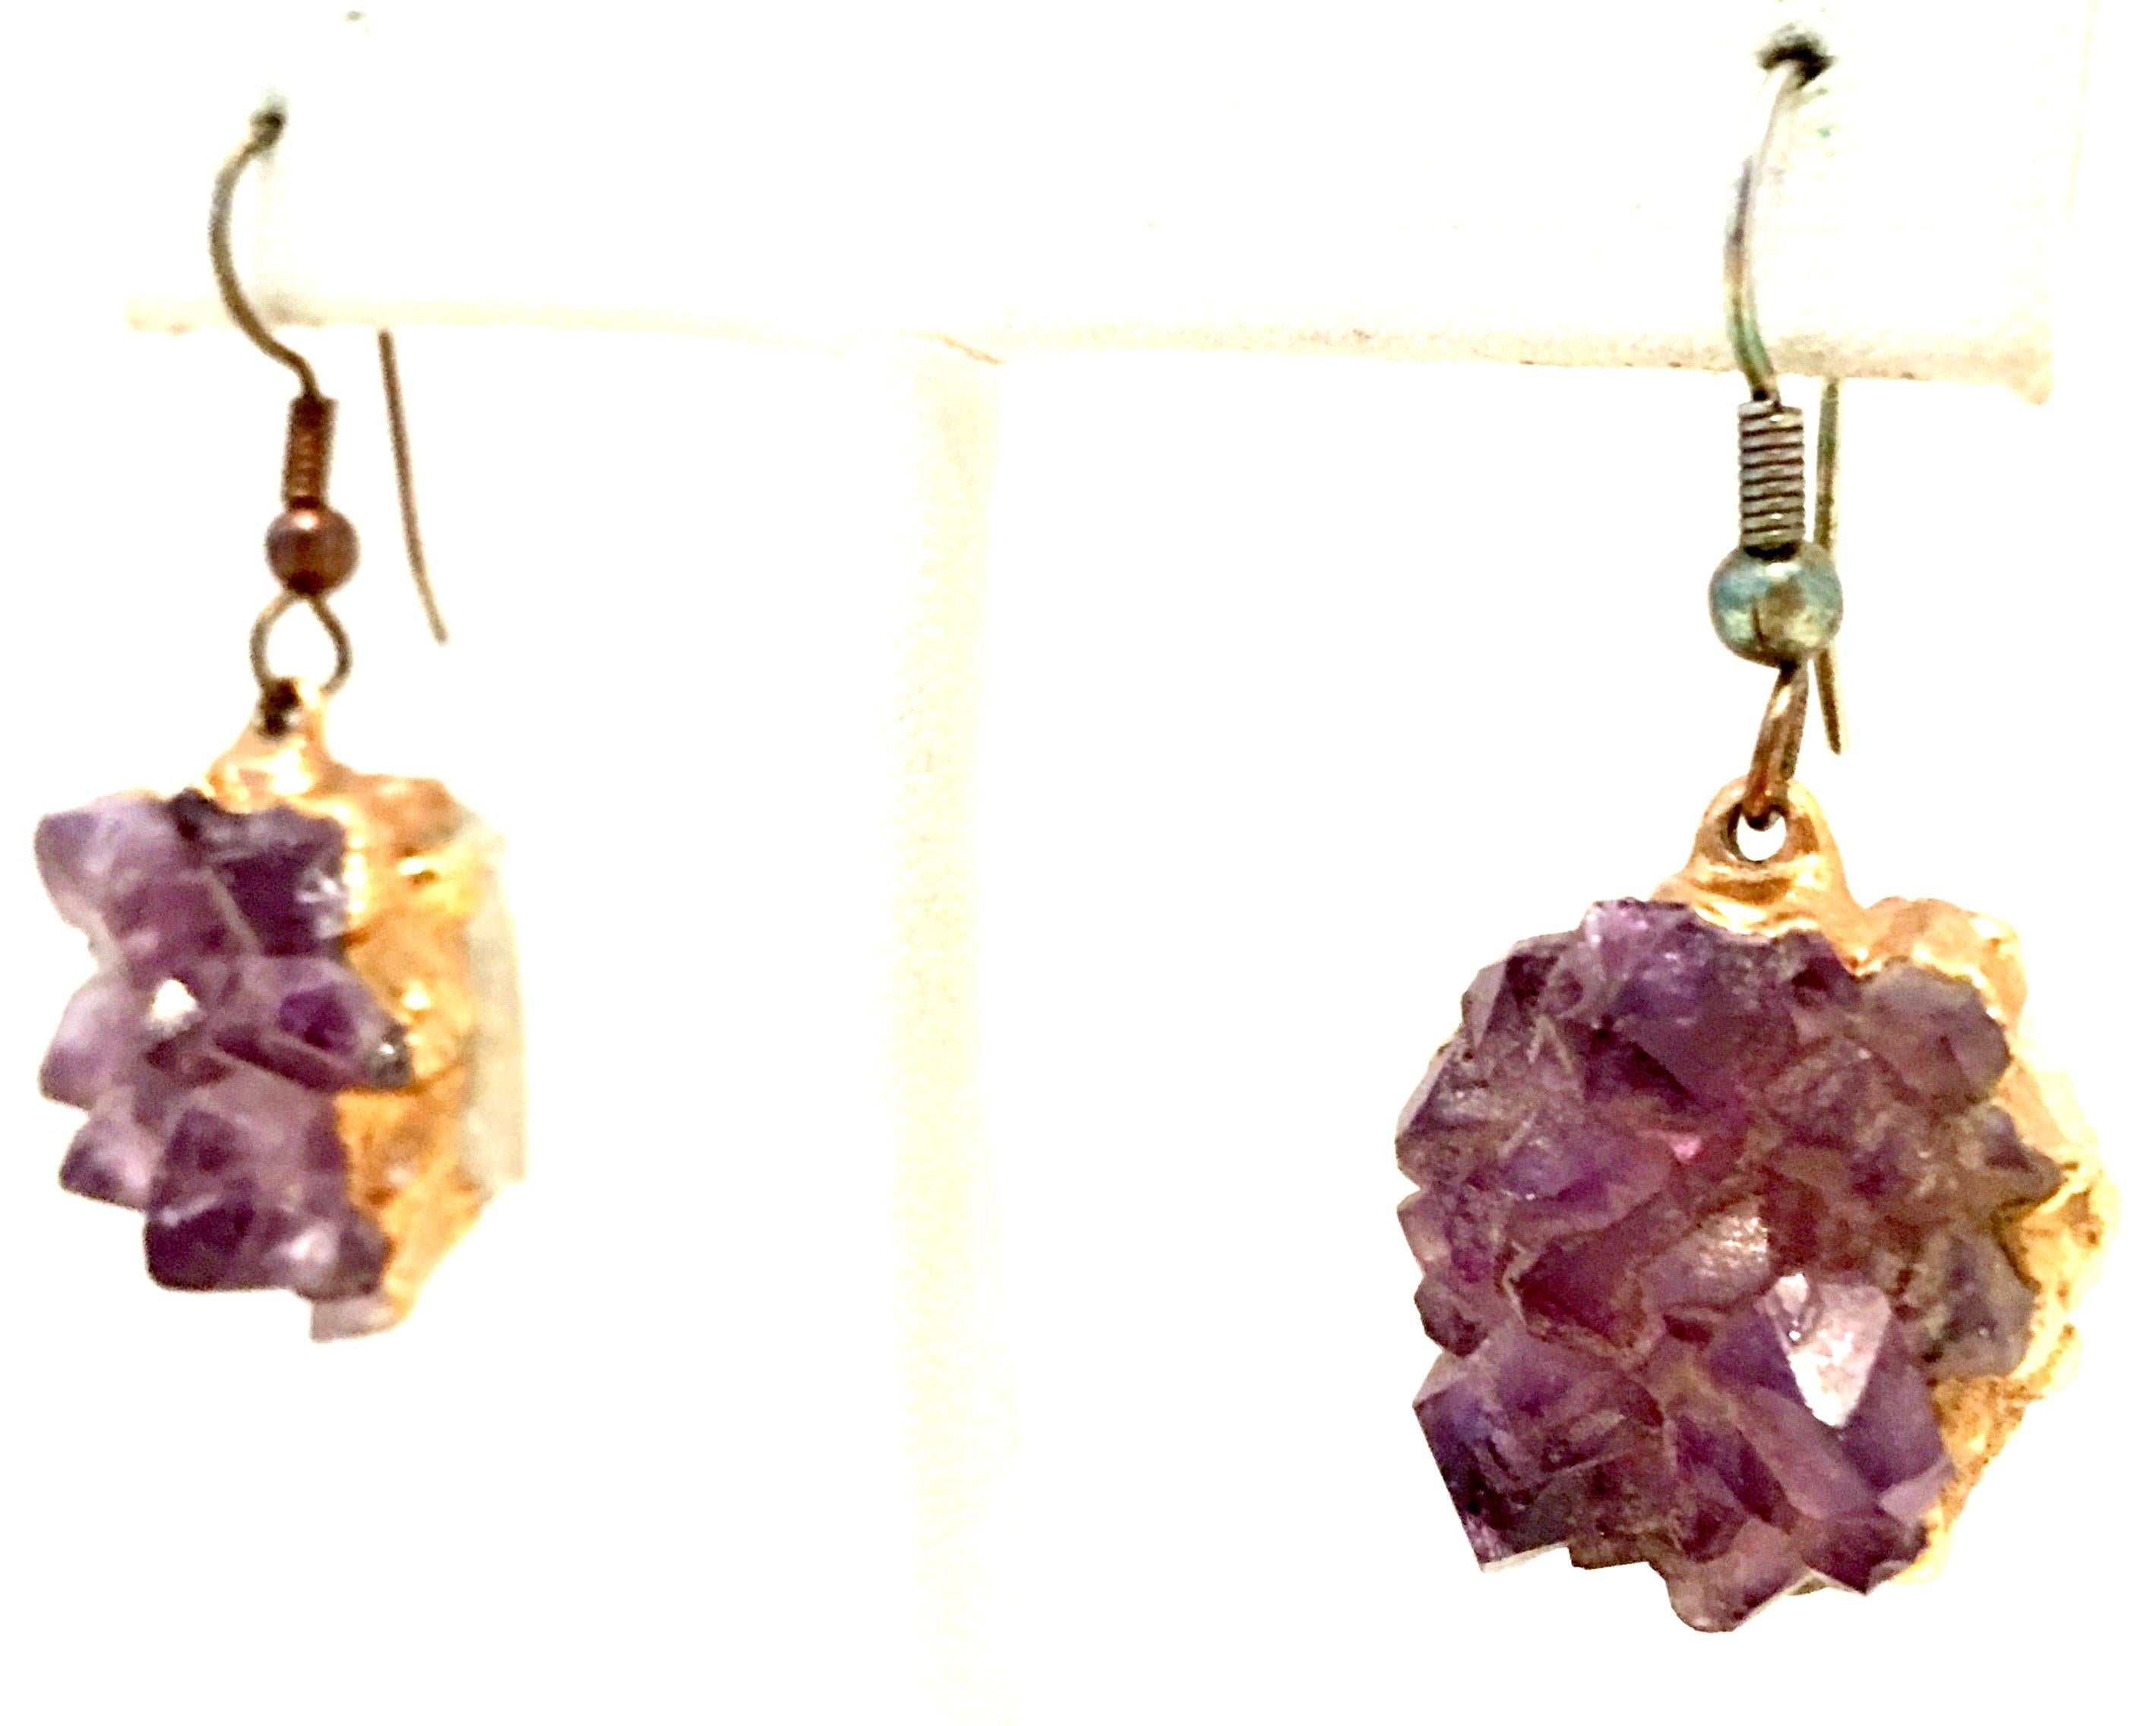 20th Century 12K Gold & Amethyst Geode Pair Of Earrings. Features dimensional and oblong amethyst geode stone, set in 12K gold 